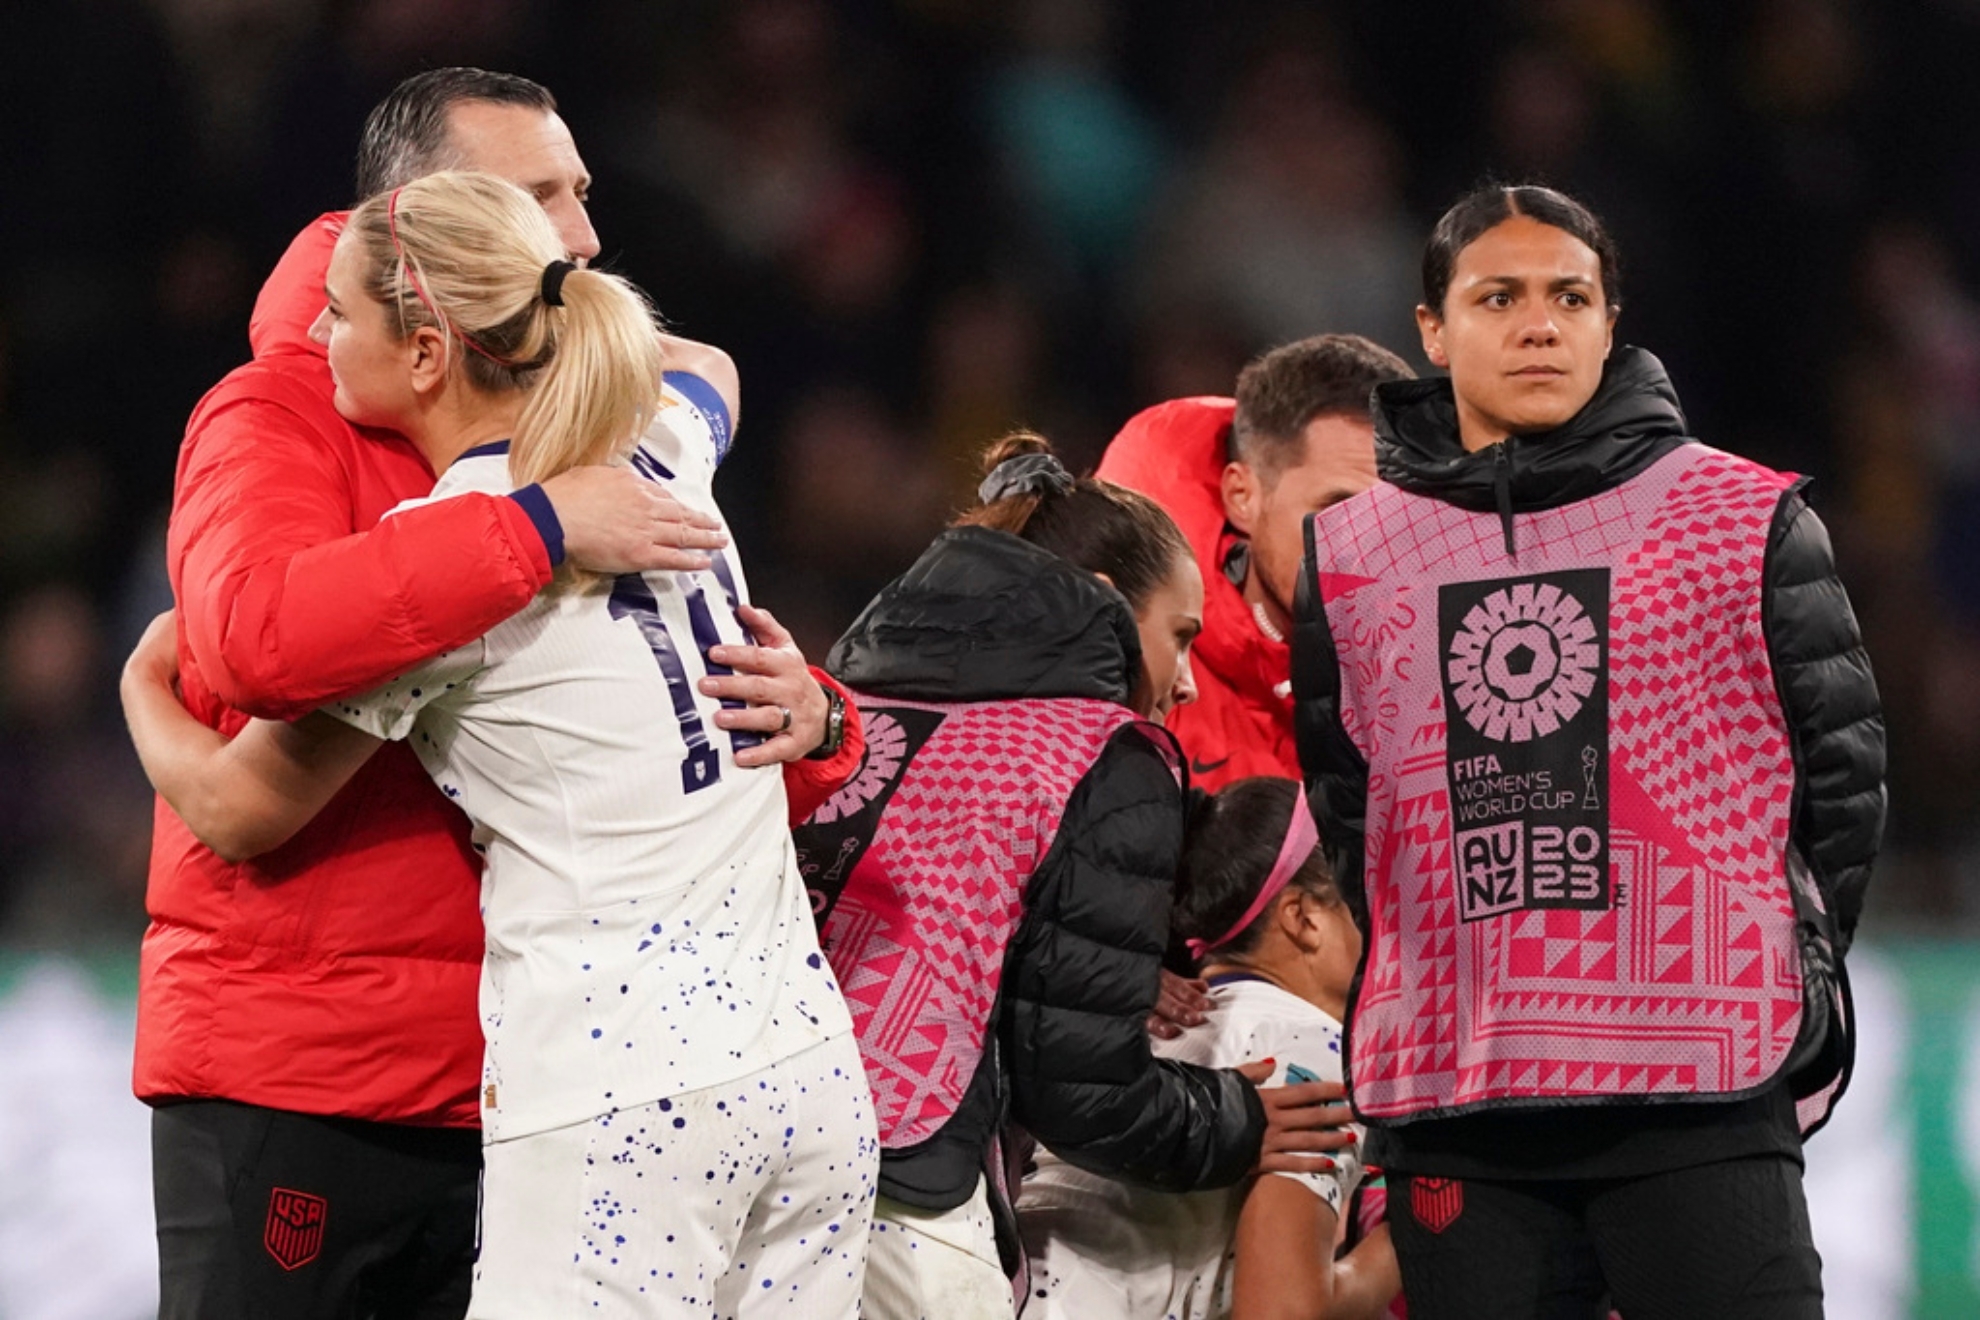 USWNT had their worst showing in their history being eliminated at the round of 16